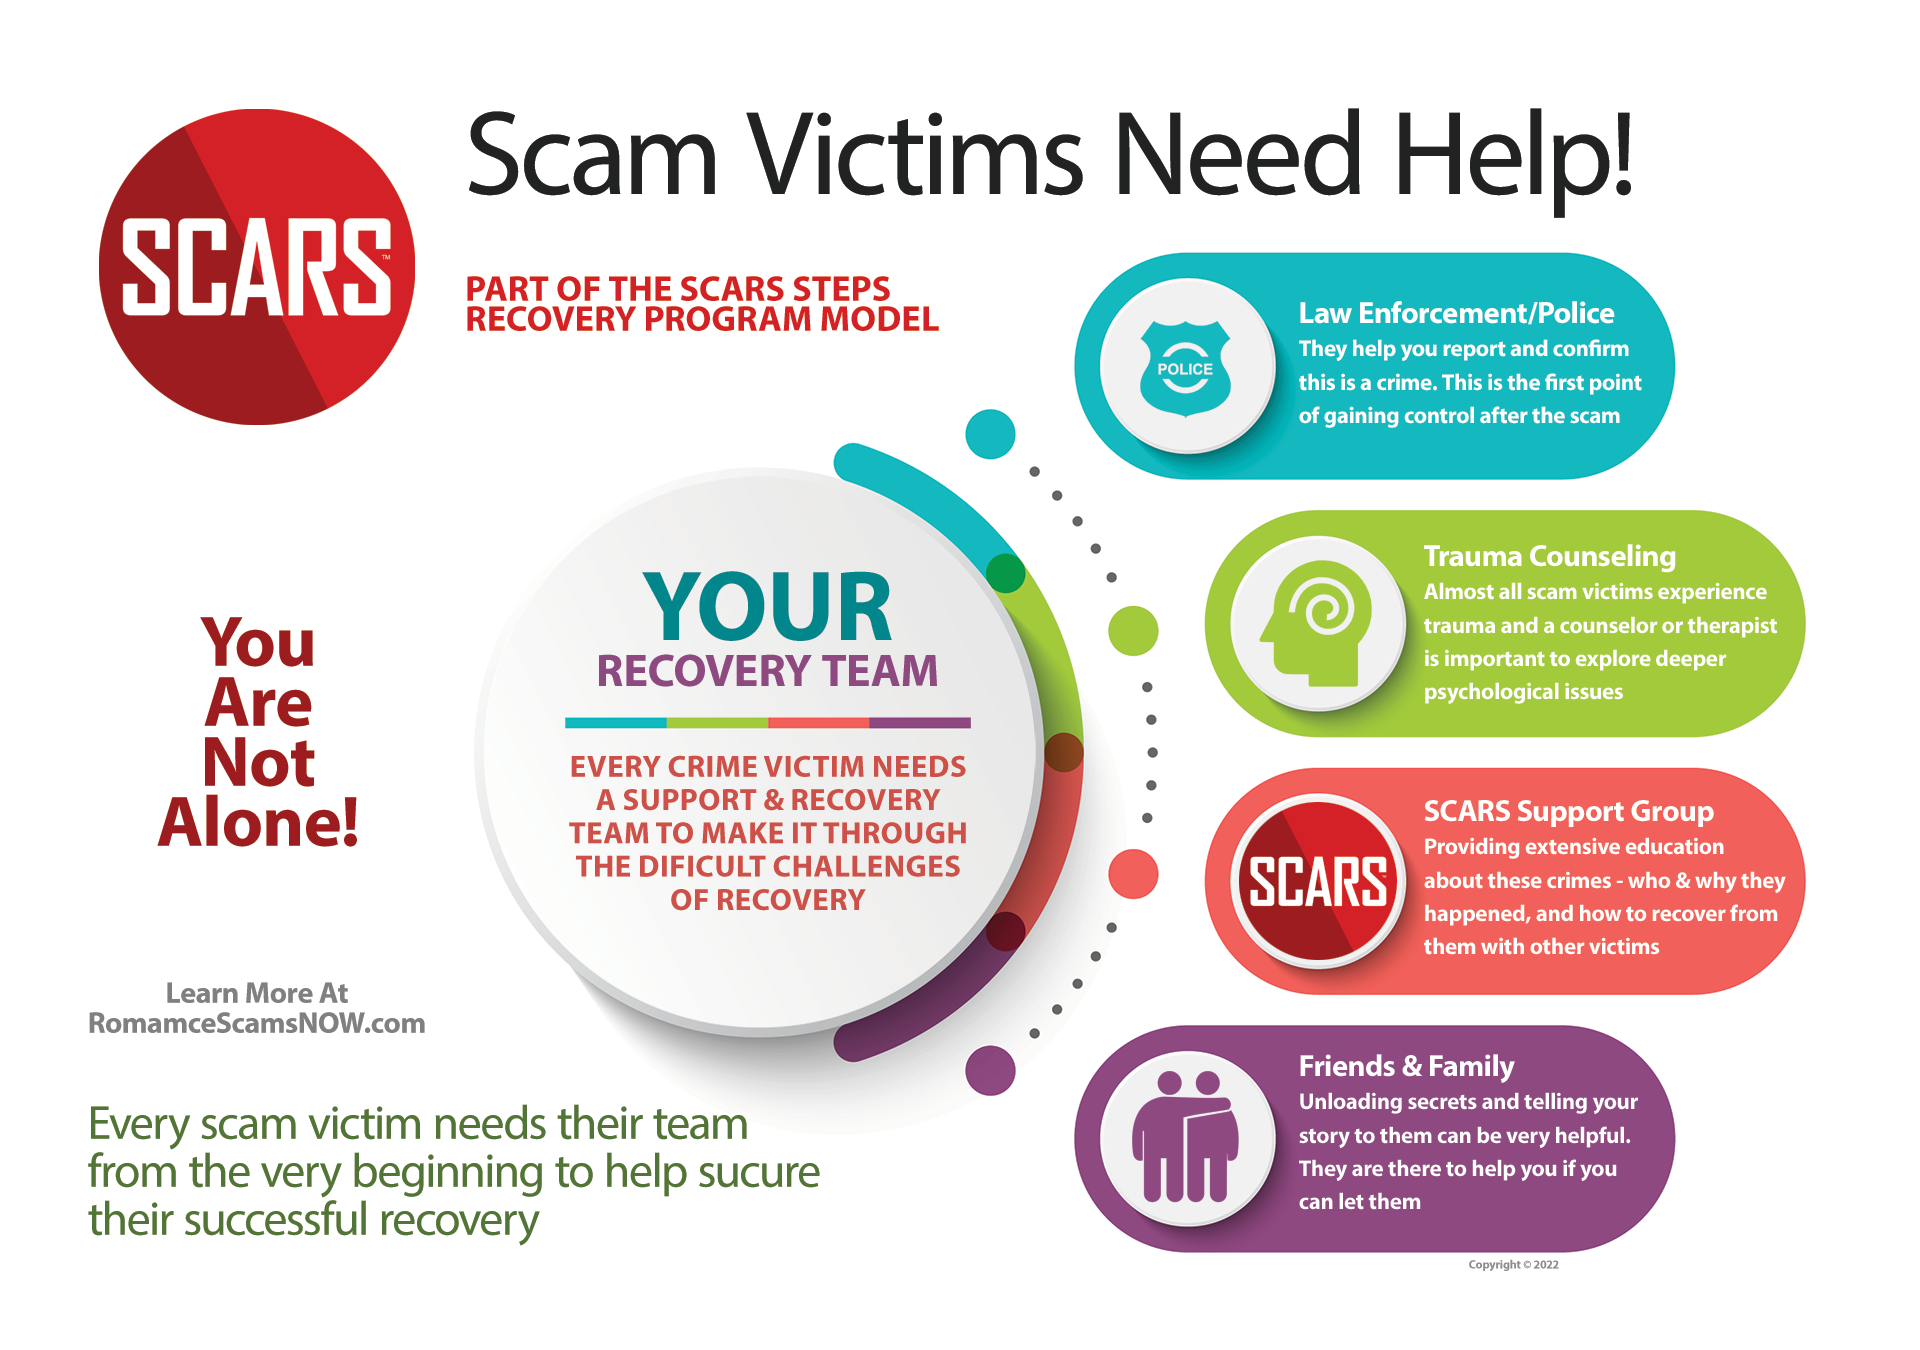 Scam Victims Need Help - You Need A Support & Recovery Team